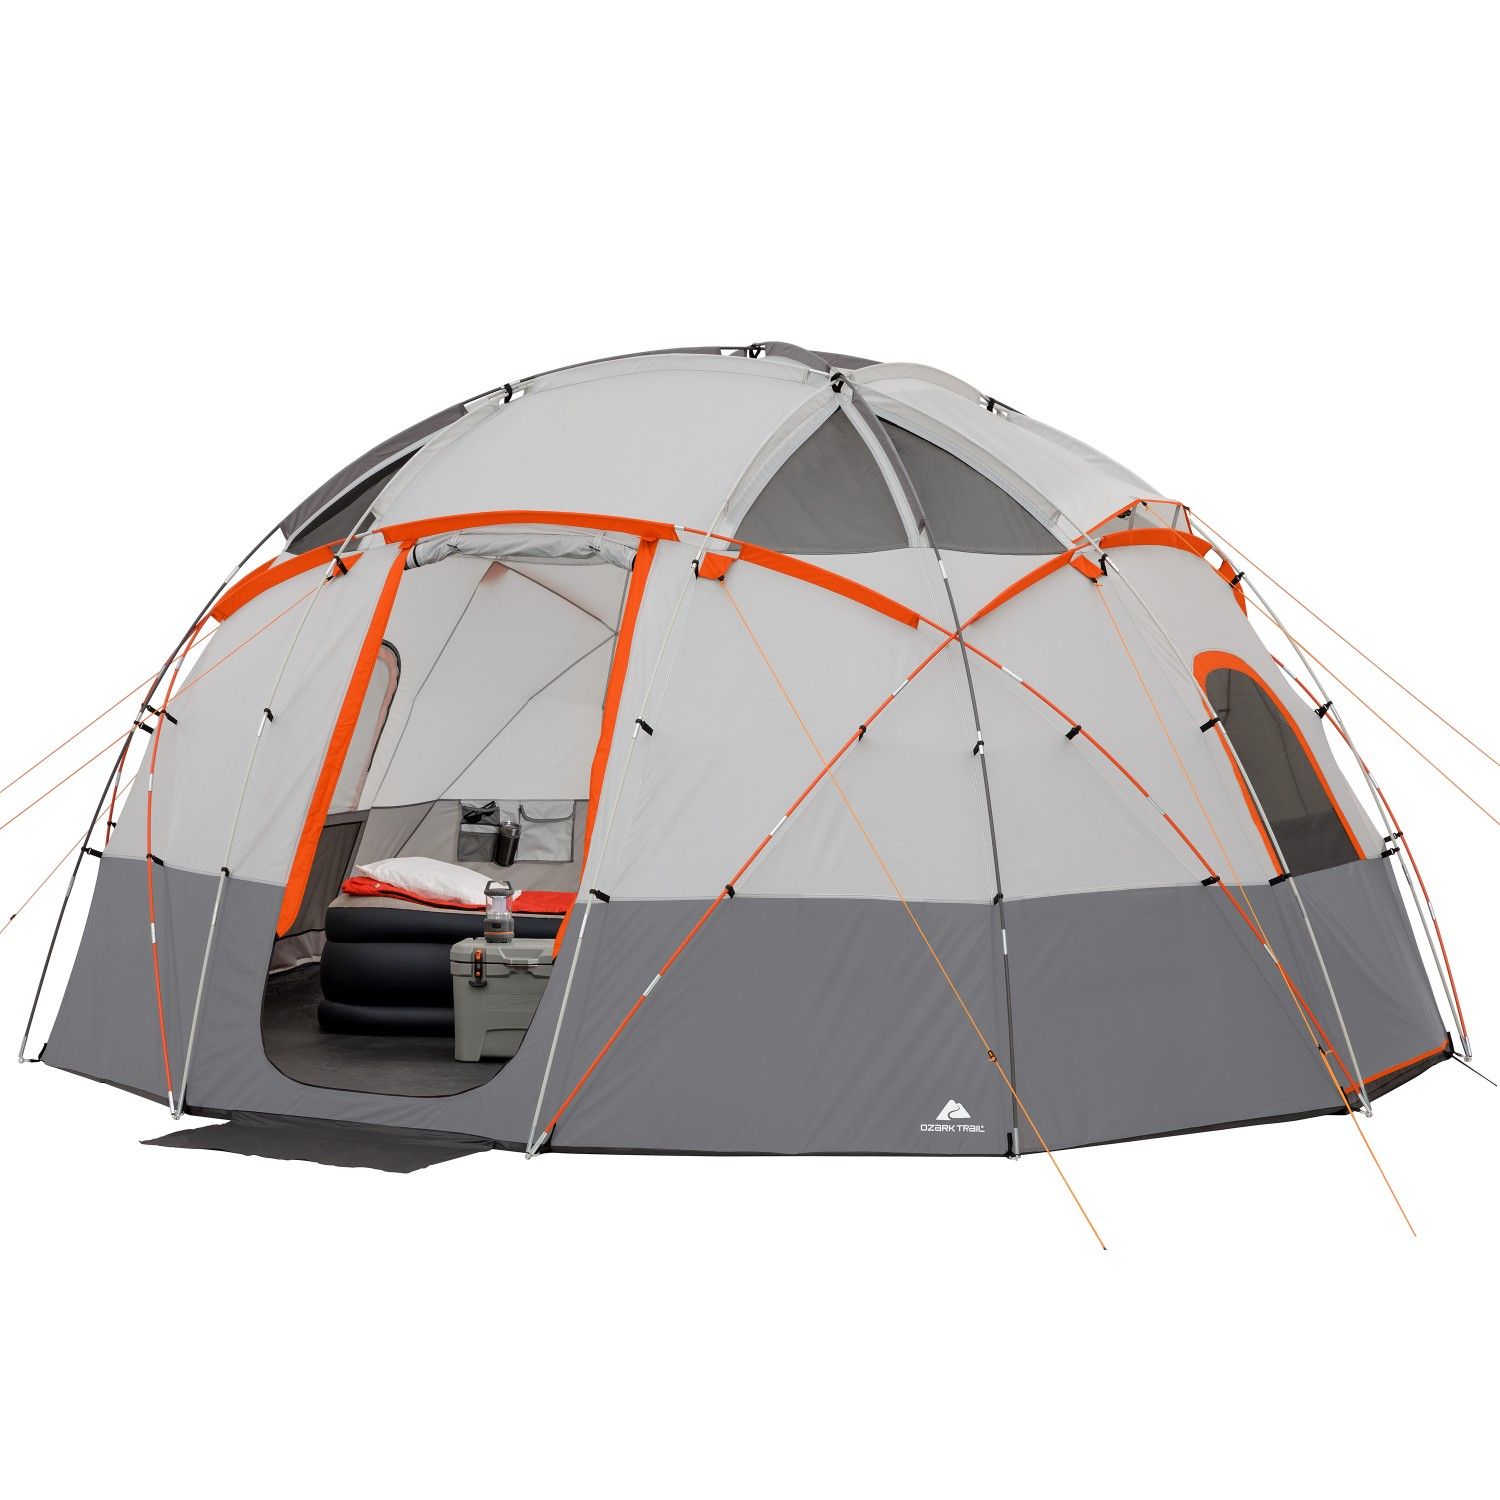 Ozark Trail 12 person Dome Tent with Light